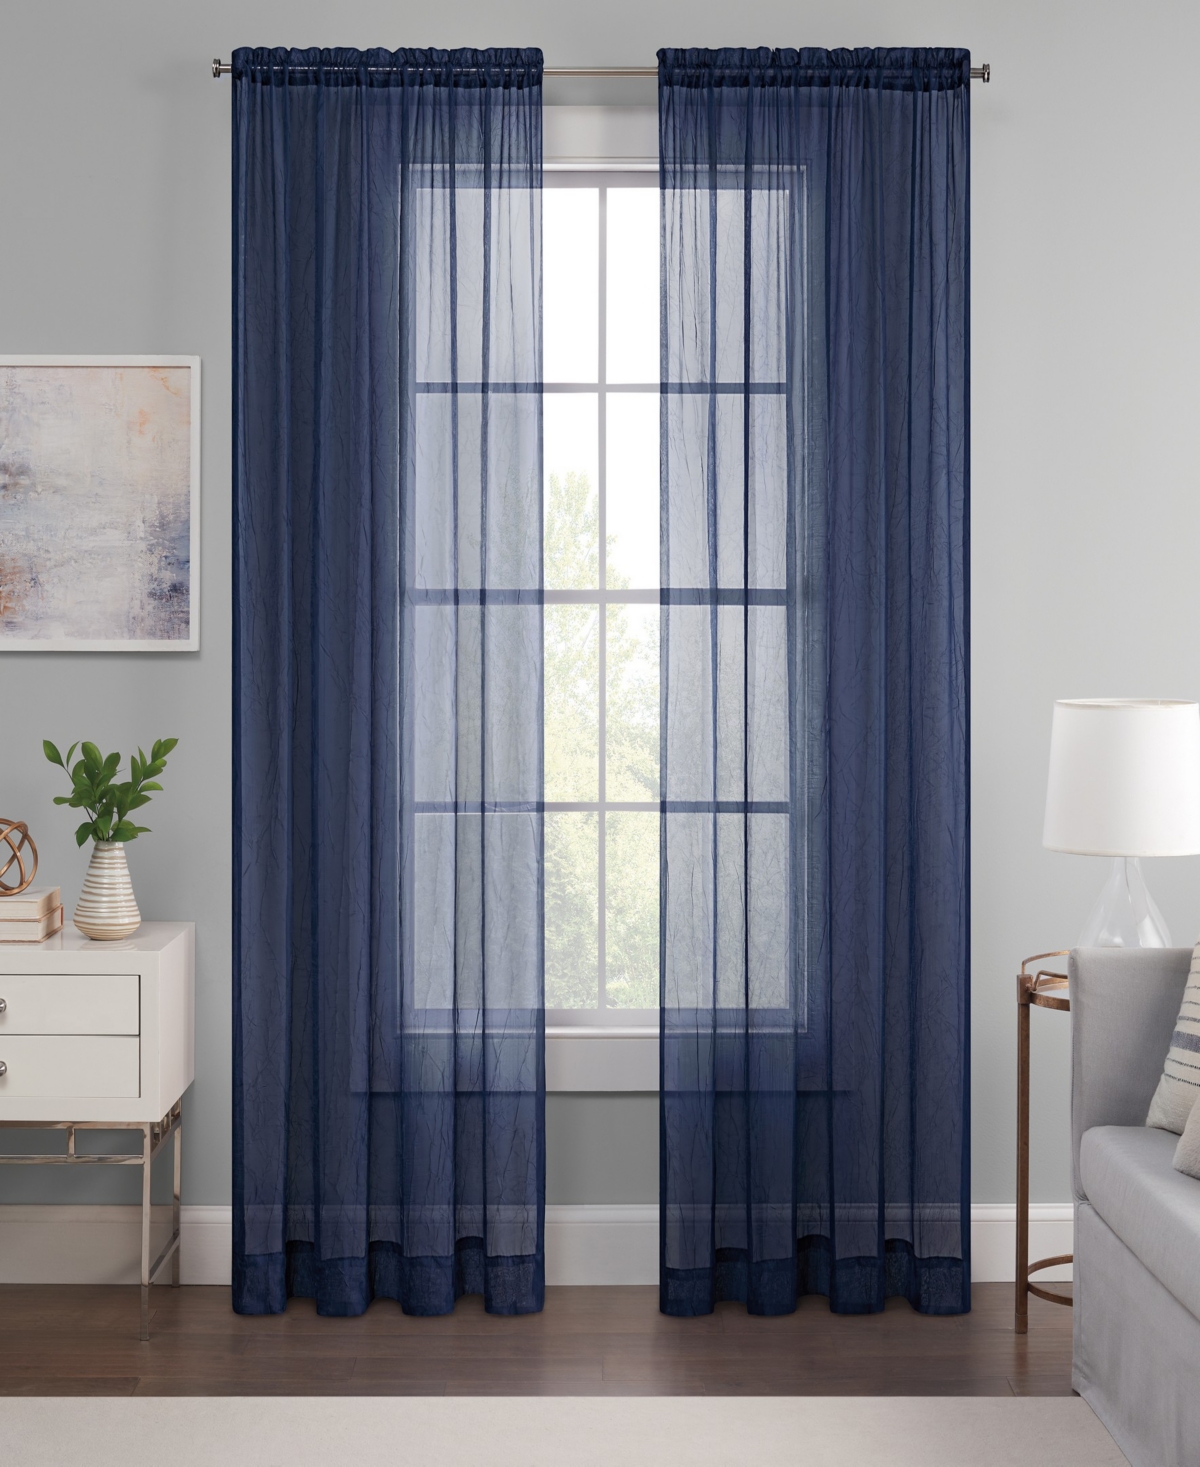 Eclipse Emina Crushed Sheer Voile Rod Pocket Curtain Panel, 52" X 84" In Navy